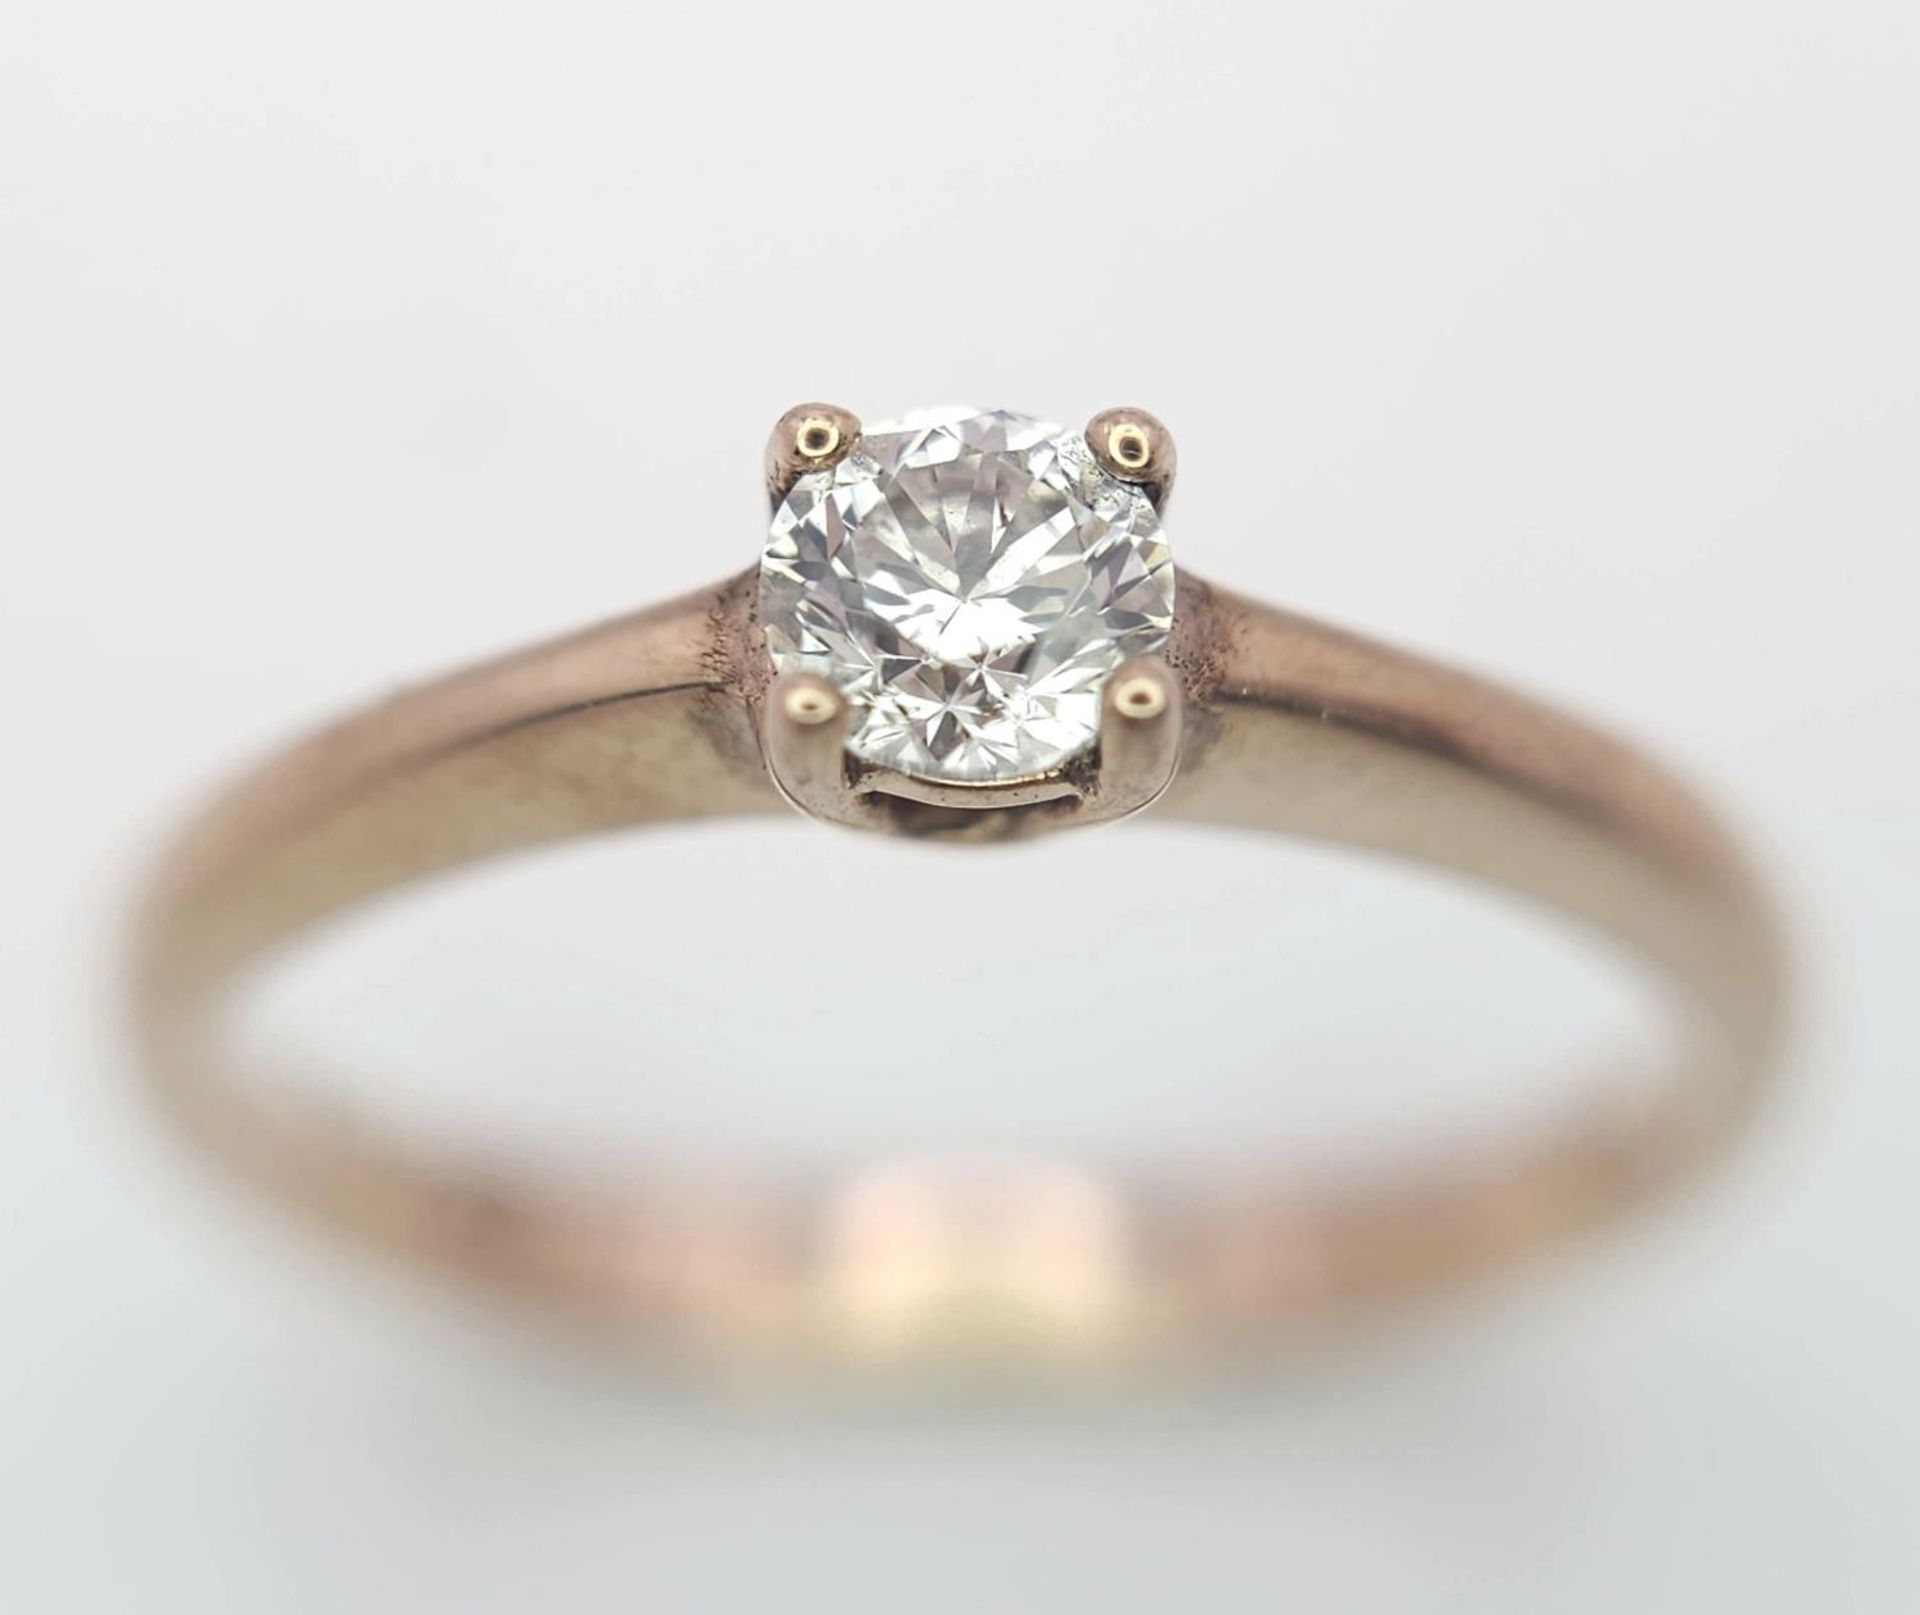 A 9K Rose Gold Diamond Solitaire Ring. 0.10ct round cut diamond. Size N. 2g total weight.